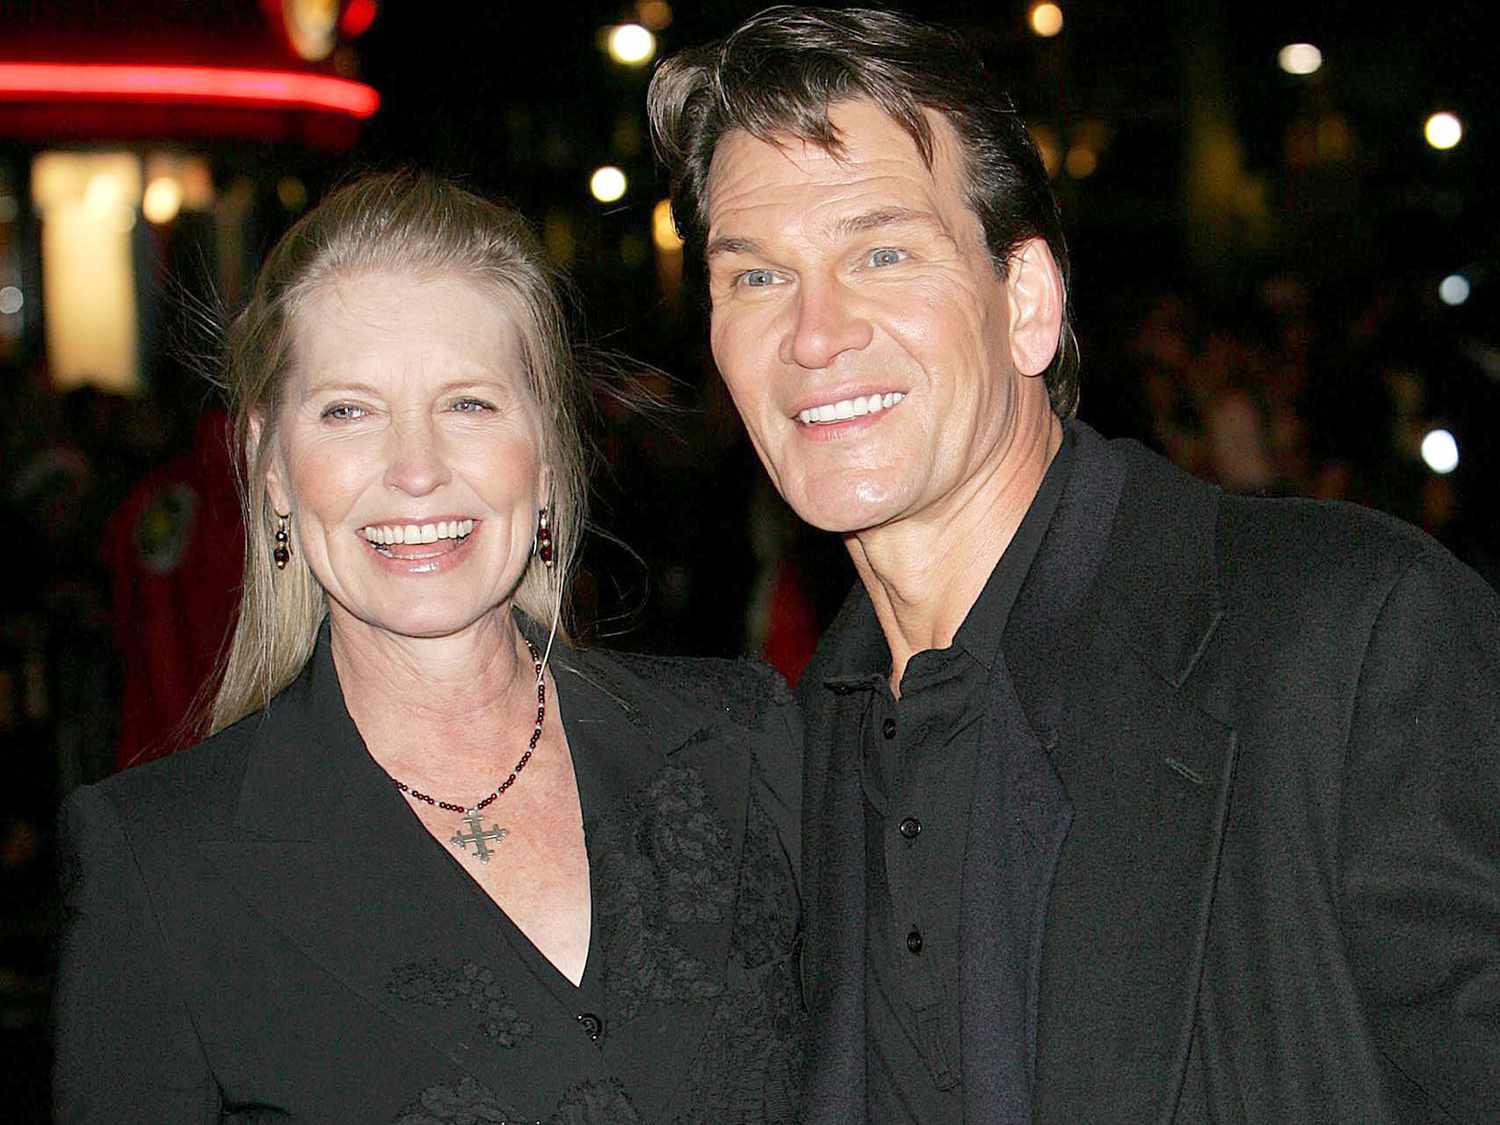 Patrick Swayze’s Wife Talks Marrying Again Following His 2009 Death [Video]